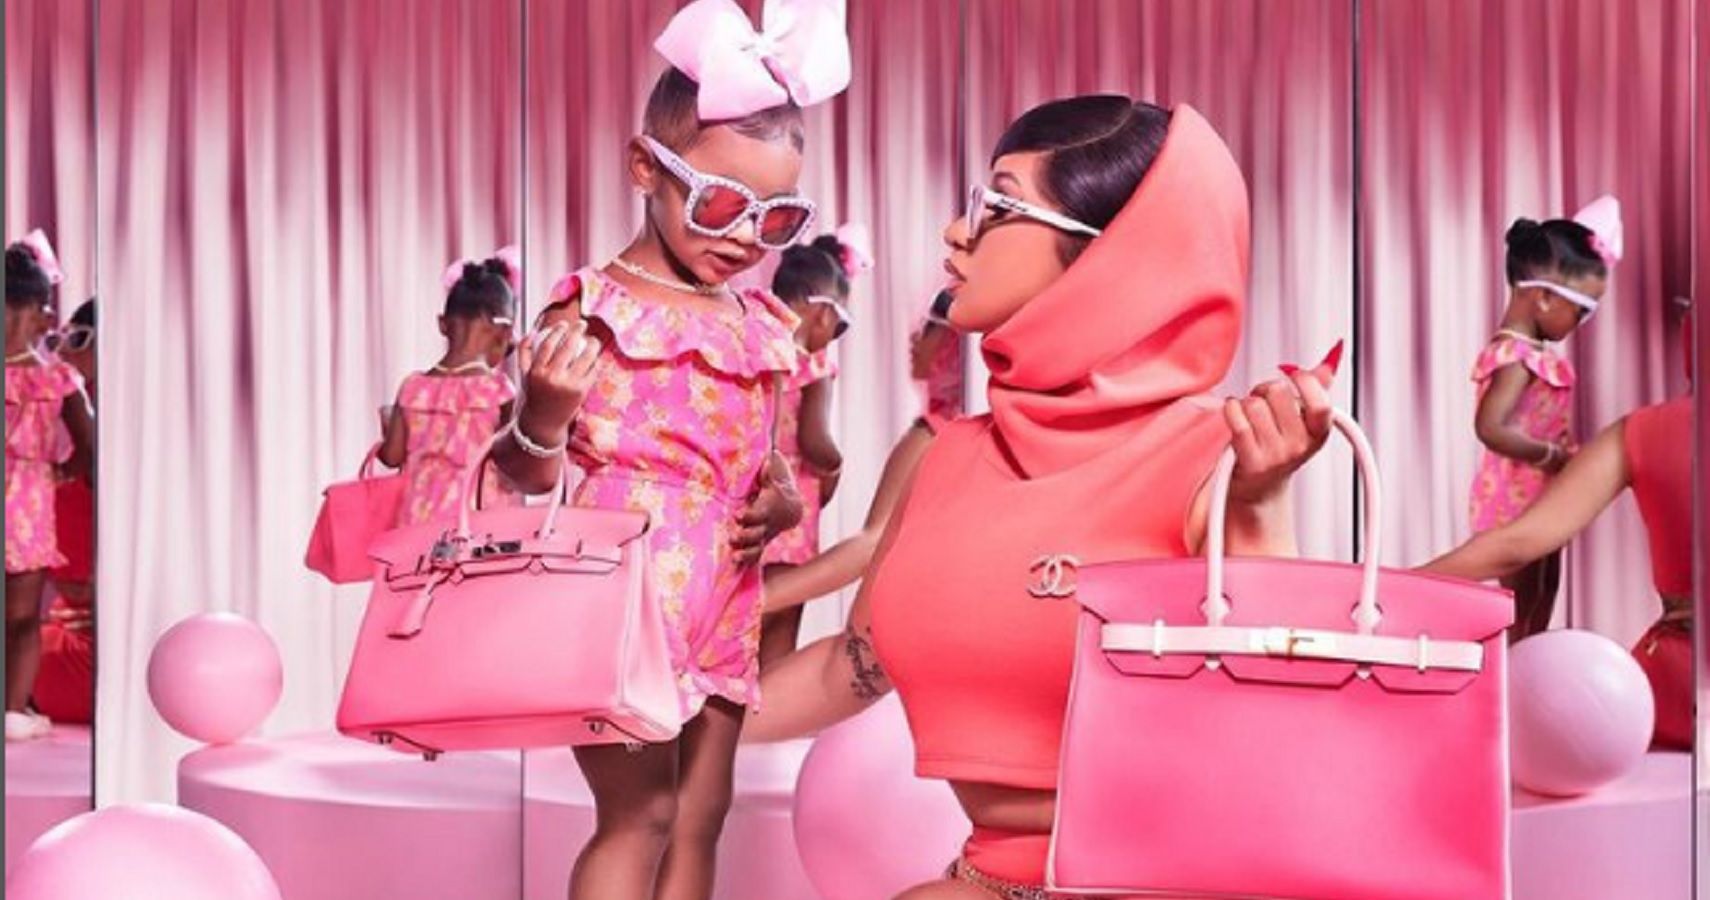 https://static1.therichestimages.com/wordpress/wp-content/uploads/2022/07/Kulture-with-her-mother-Card-B-in-a-pink-themed-photoshoot.jpg